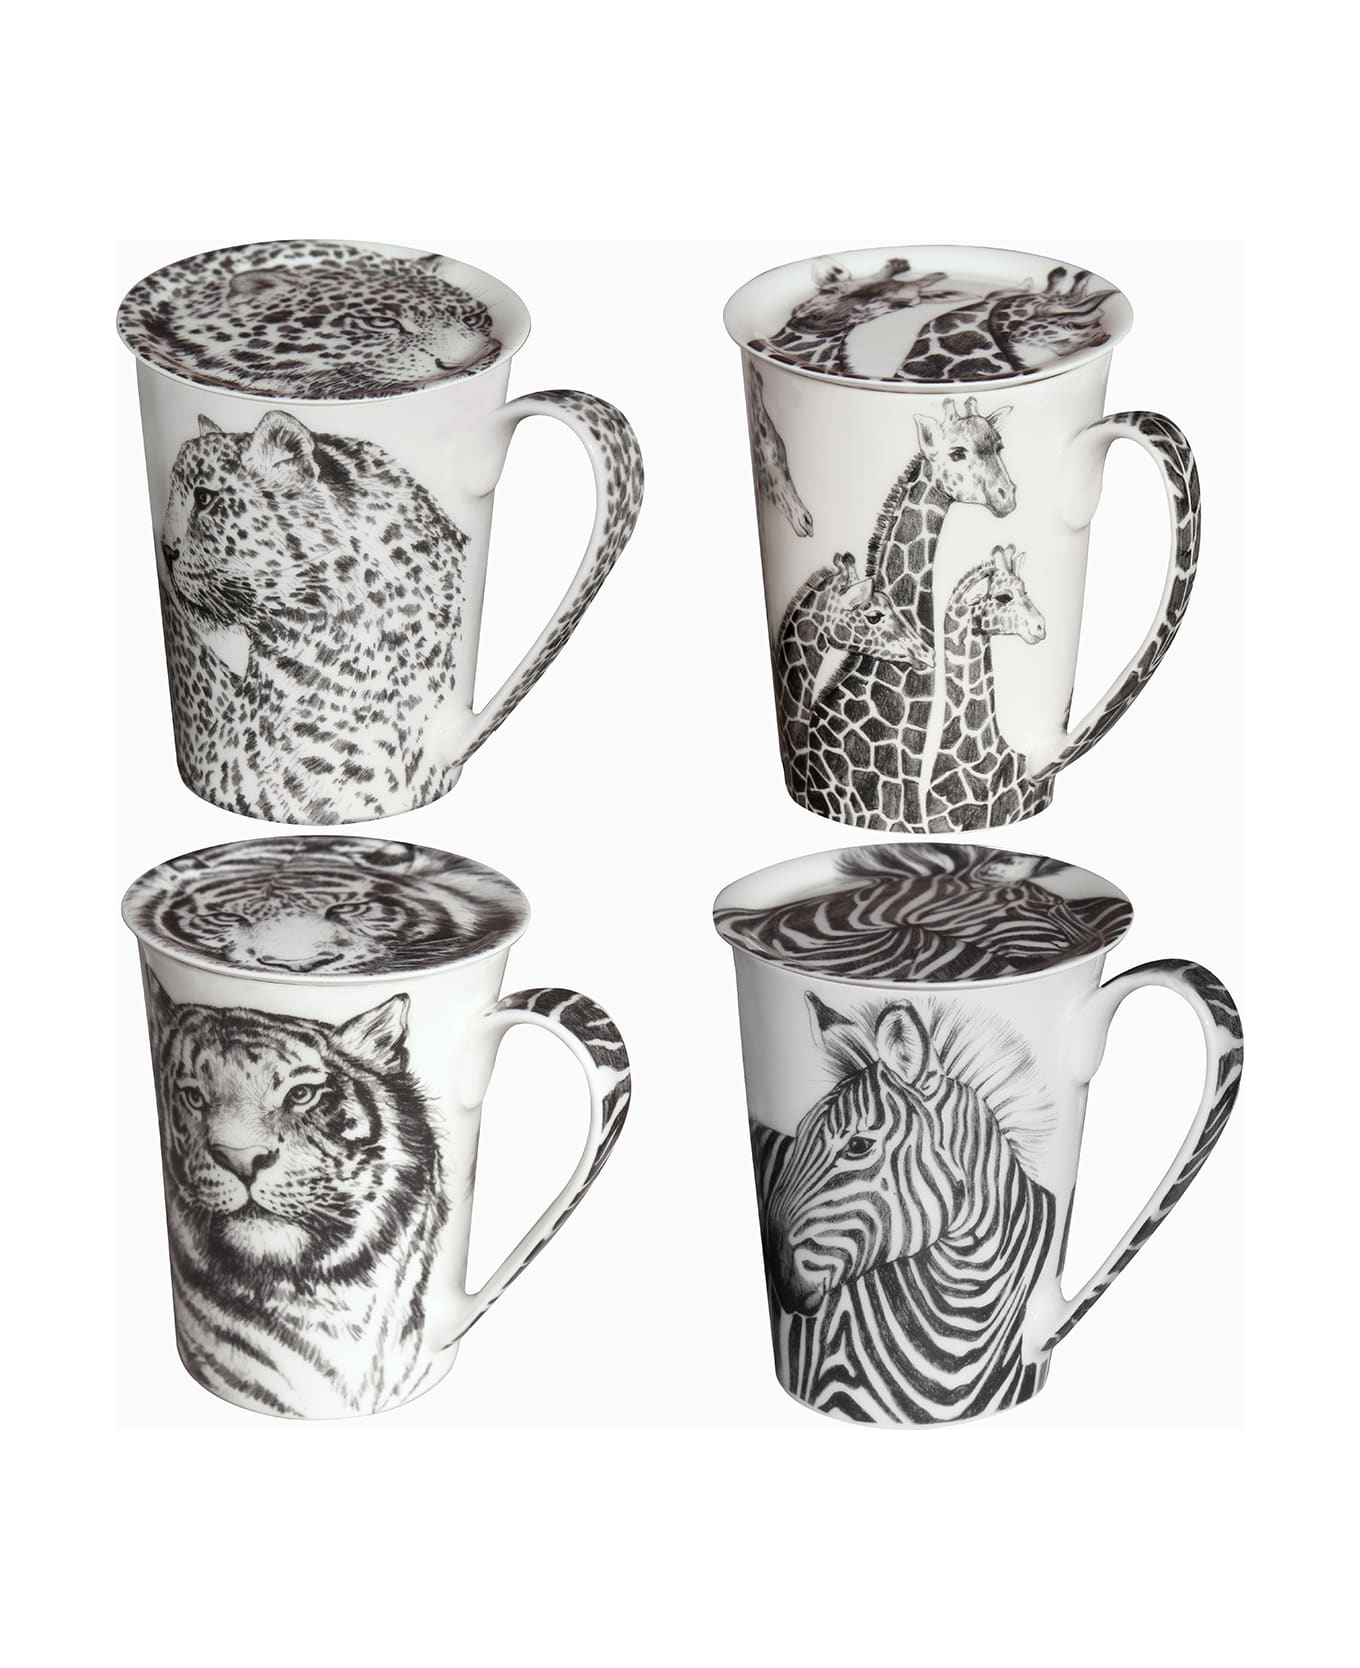 Taitù Assorted Set of 4 Covered Mugs - Wild Spirit Collection - Black